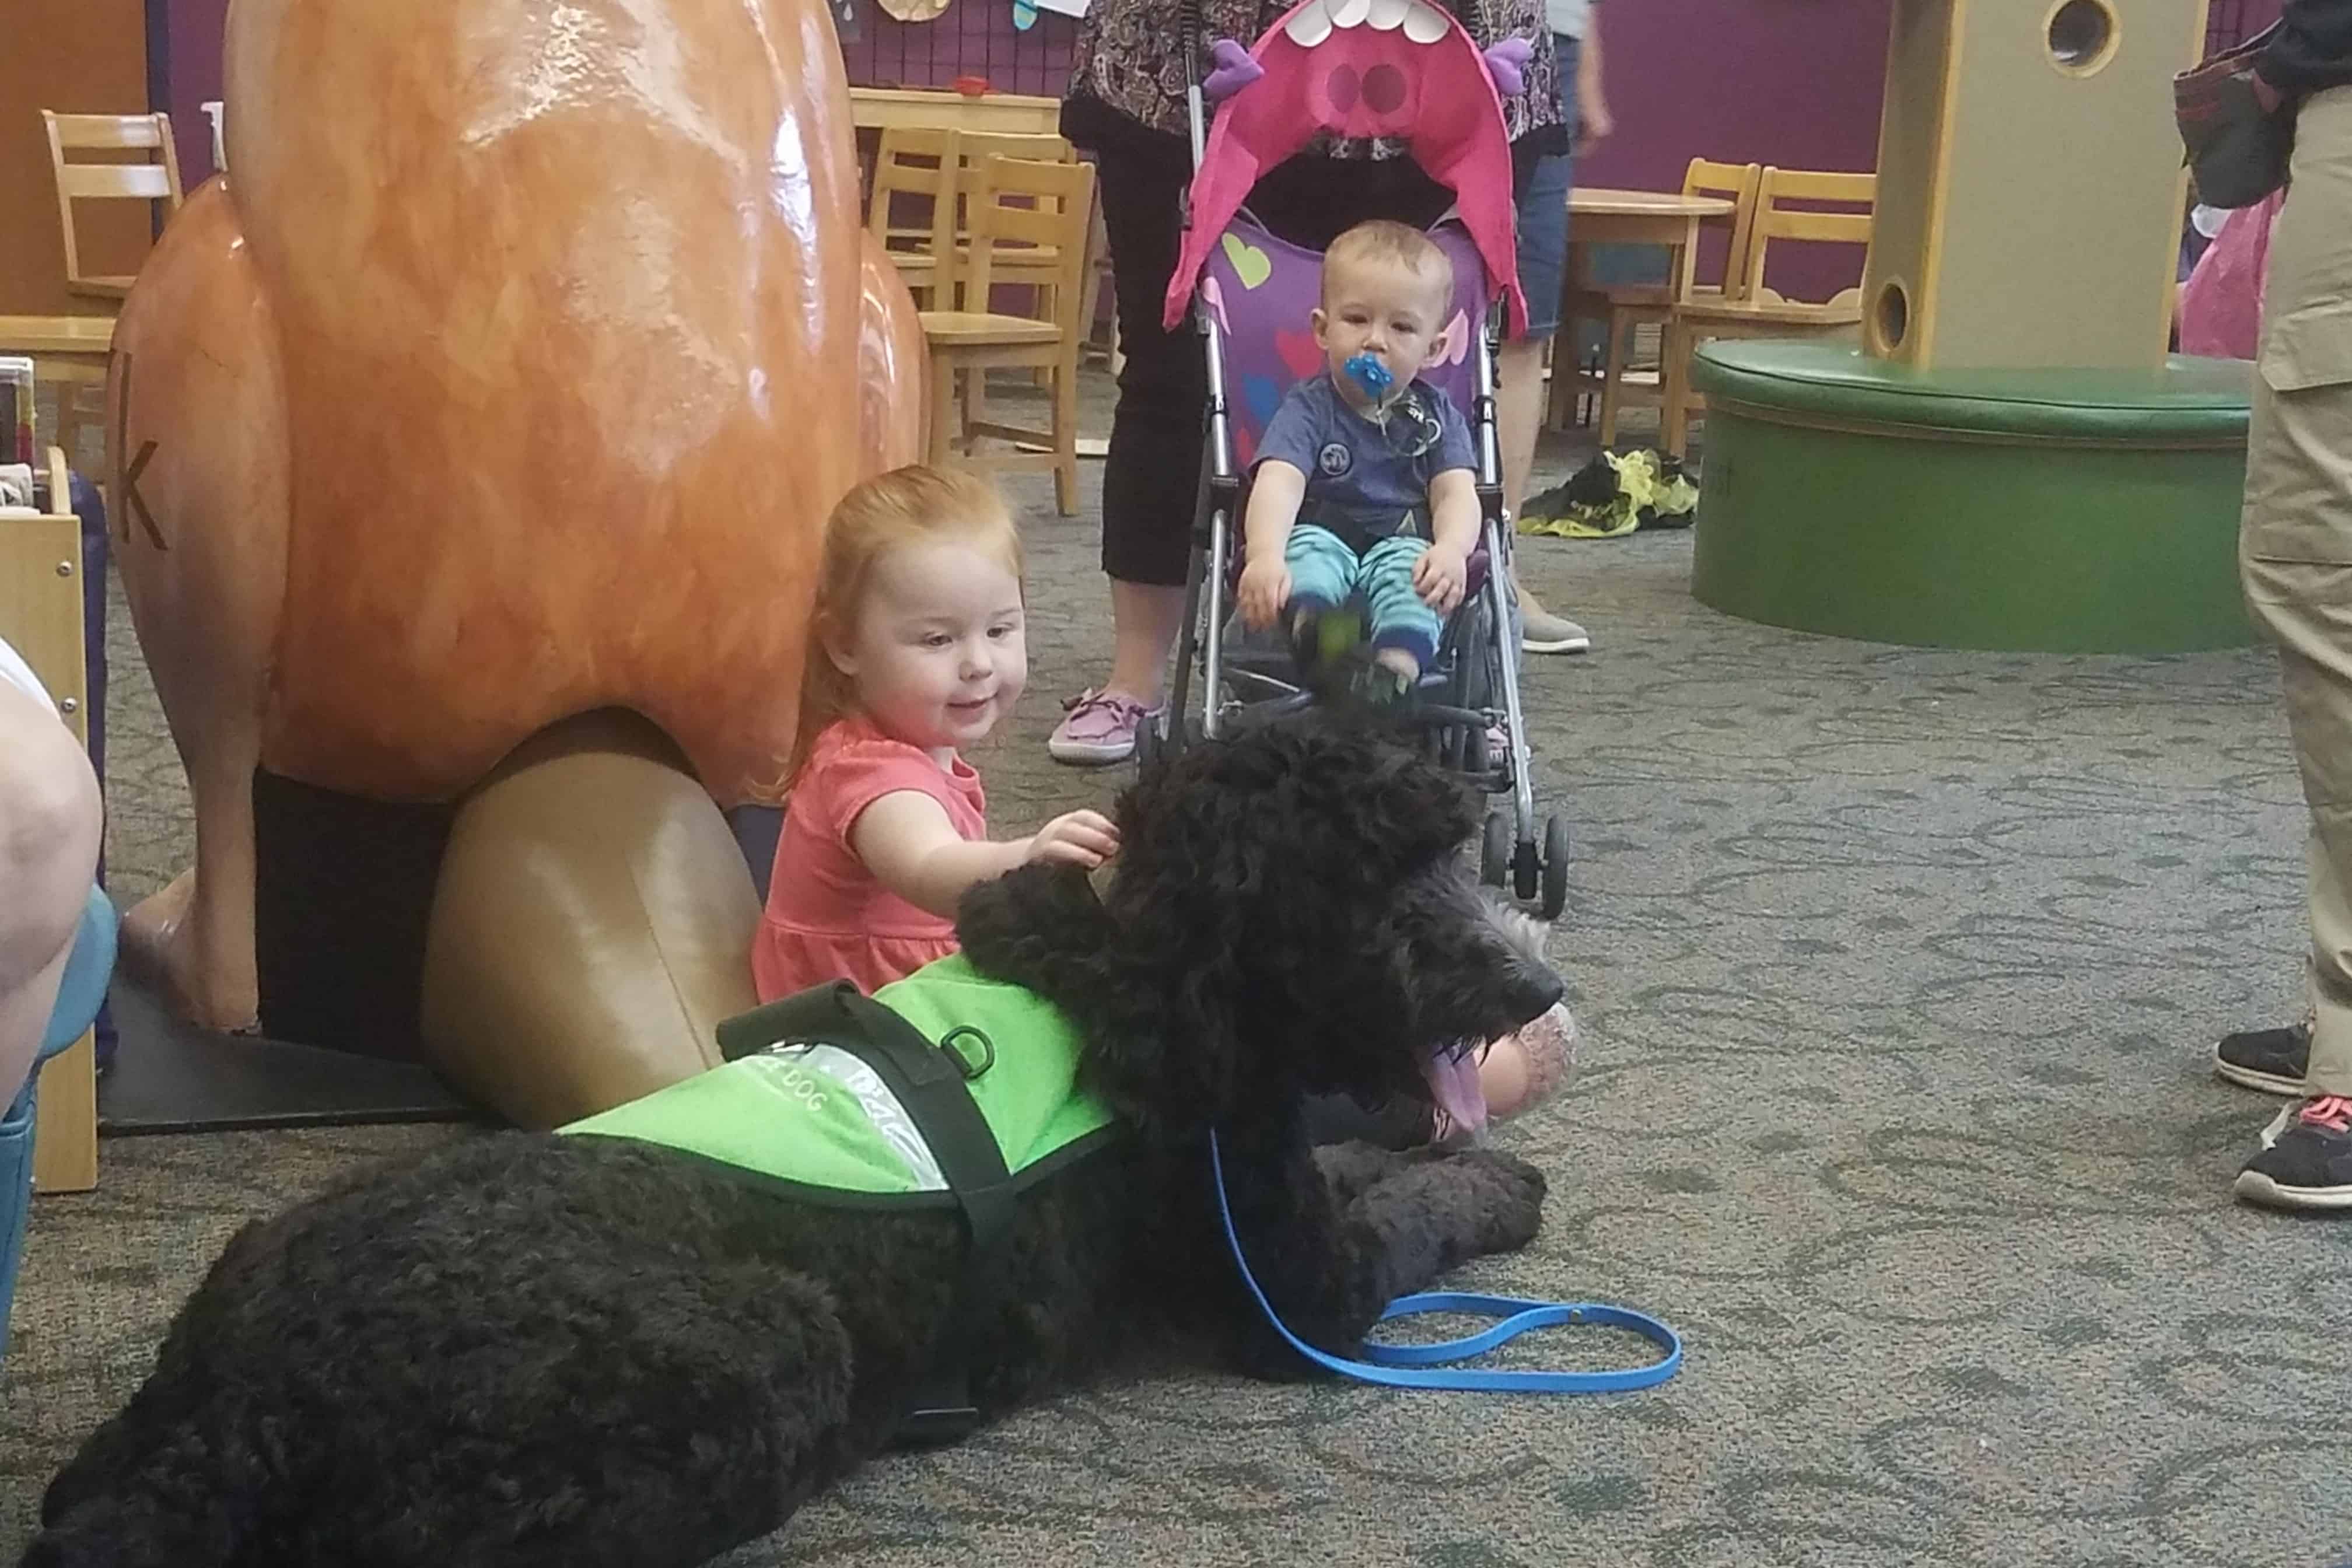 socializing service dogs to children